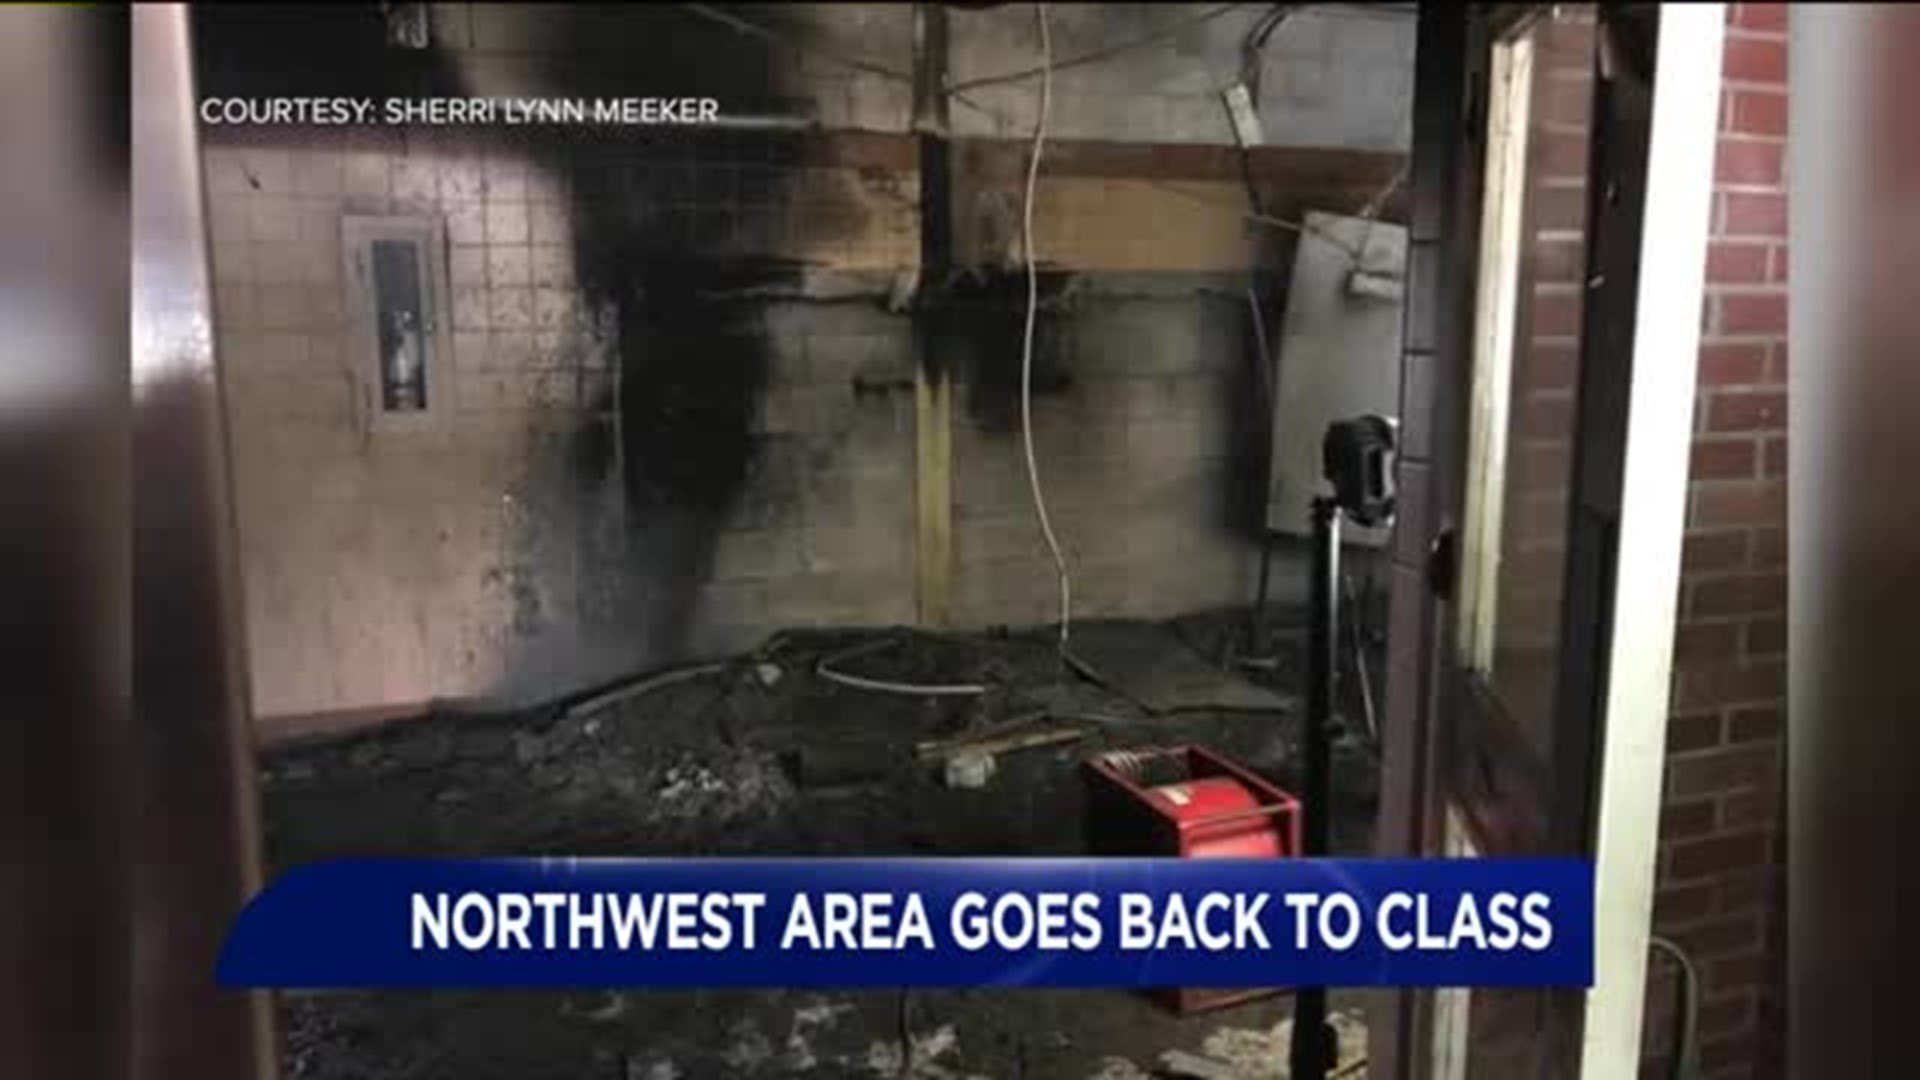 Back to Class After Fire at Northwest Area High School